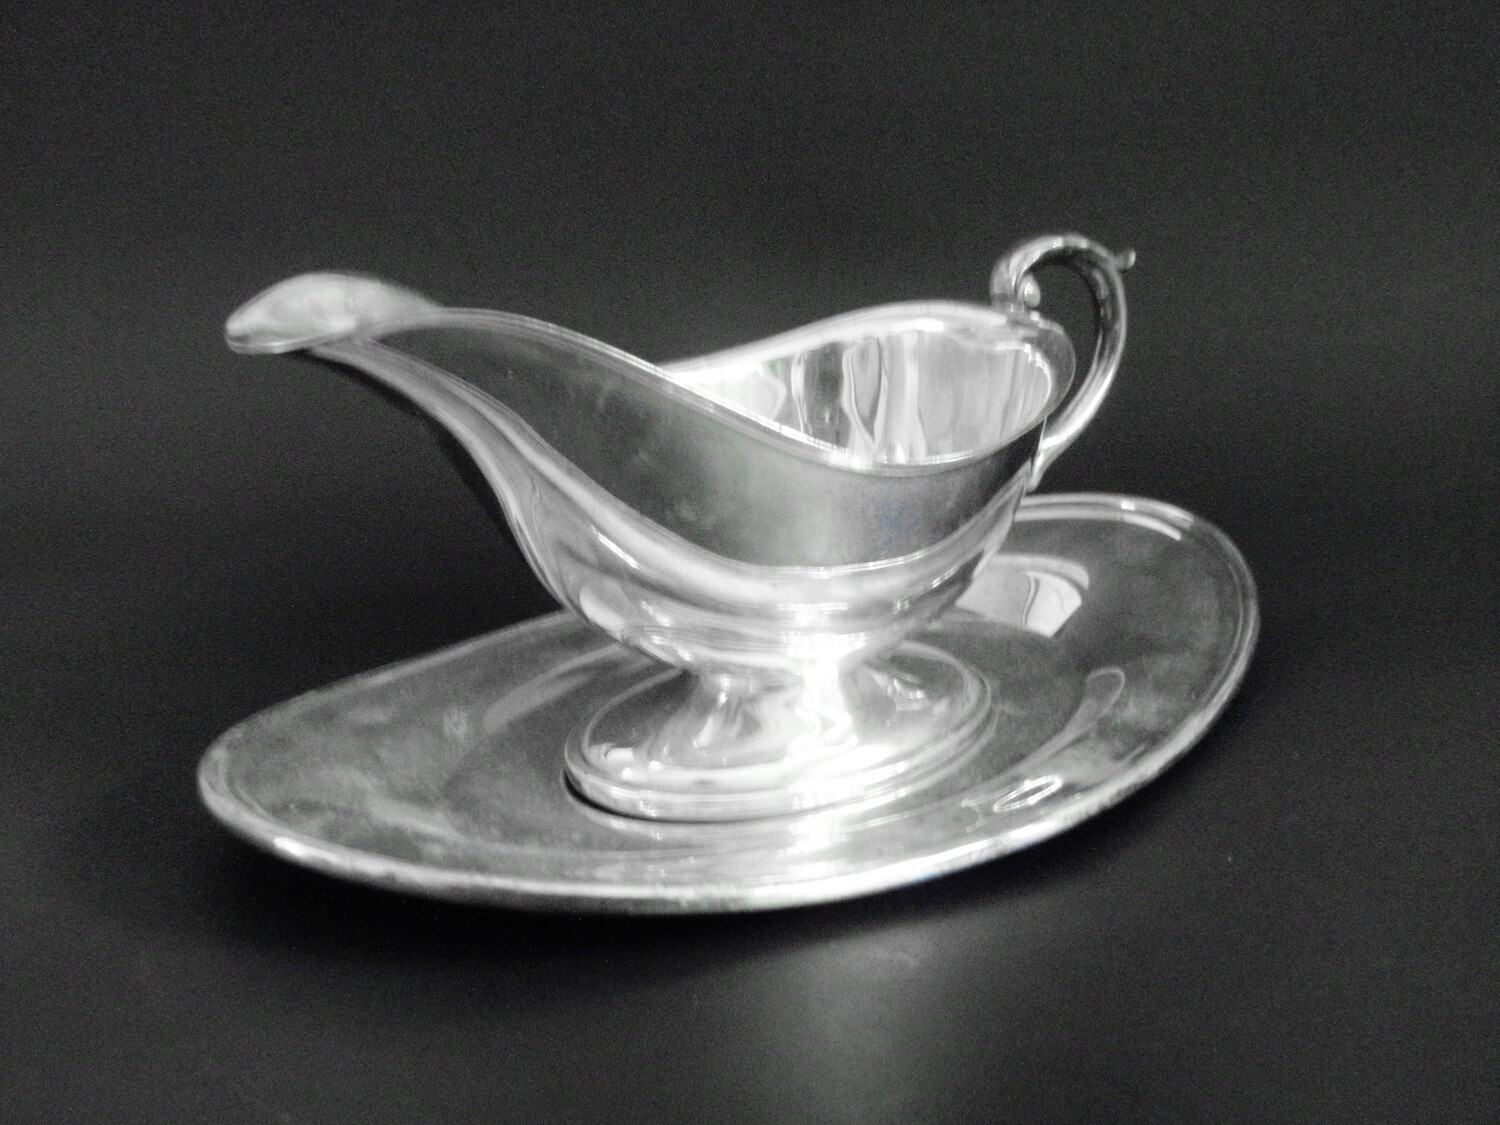 Vintage Eaton Haddon Hall Silver Gravy Boat and Underplate